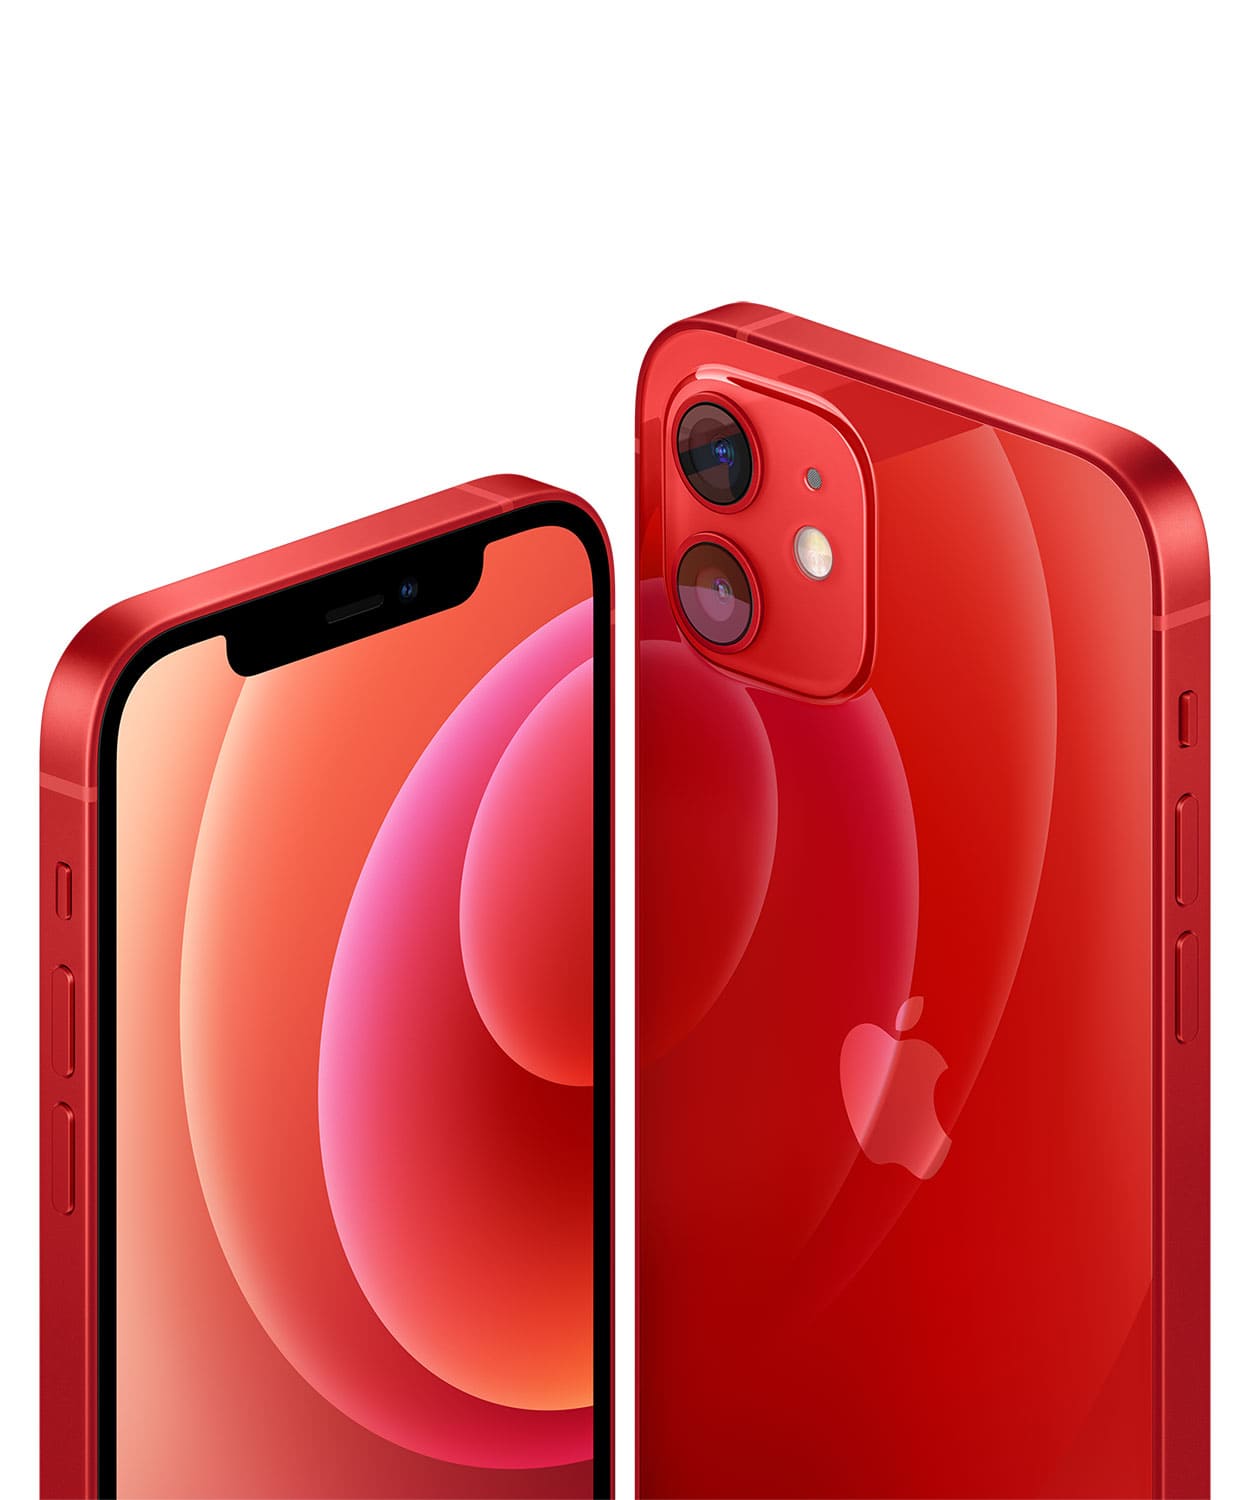 Apple iPhone 12, 128 ГБ, (PRODUCT)RED